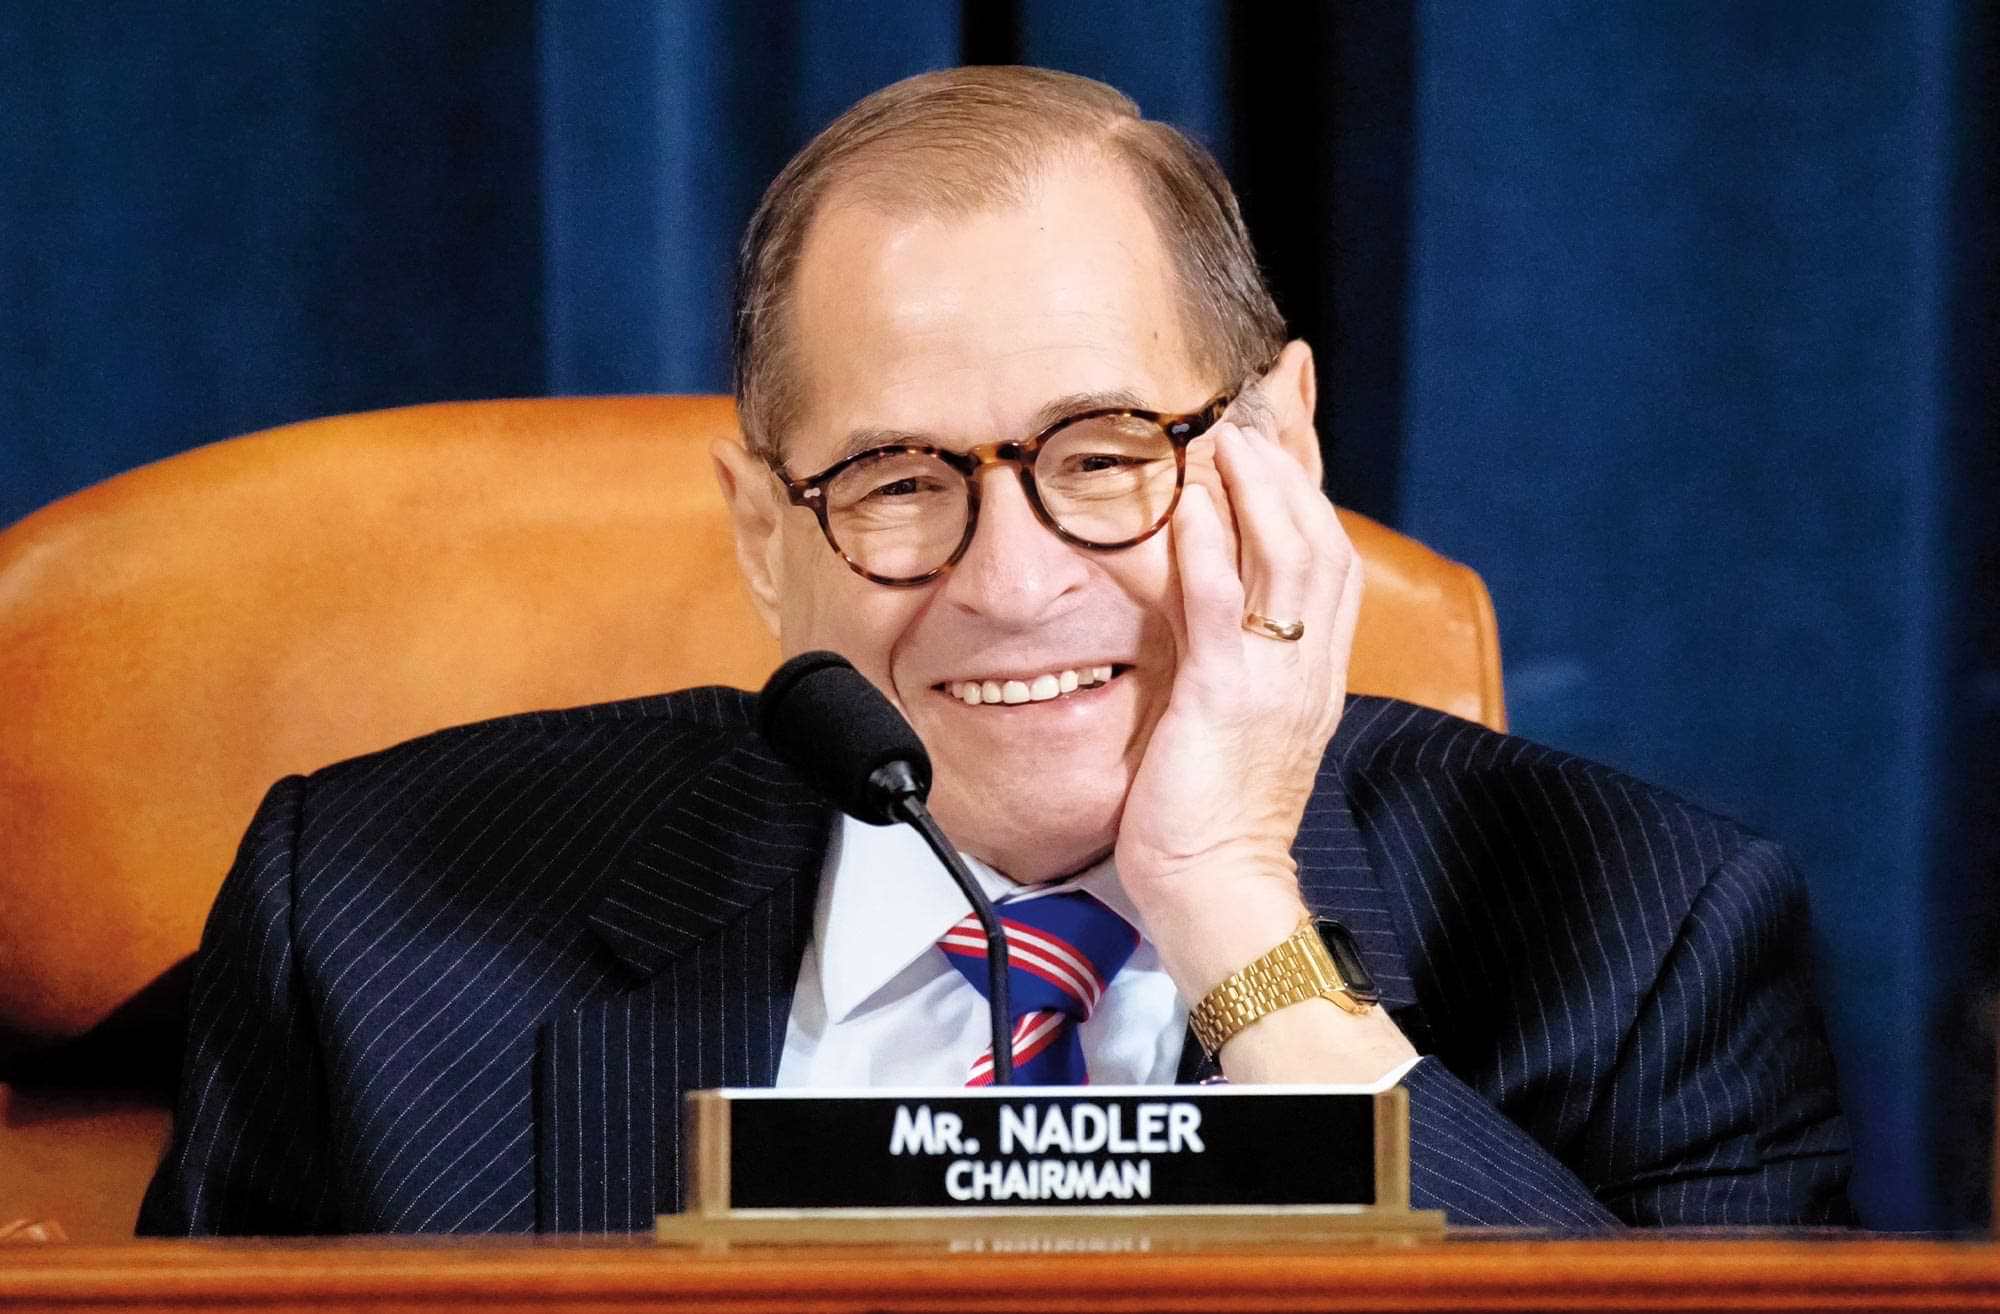 close view of Jerry Nadler smiling while sitting at mircophoned table, a name plate resting in front of him reads "Mr. Nadler, Chairman"